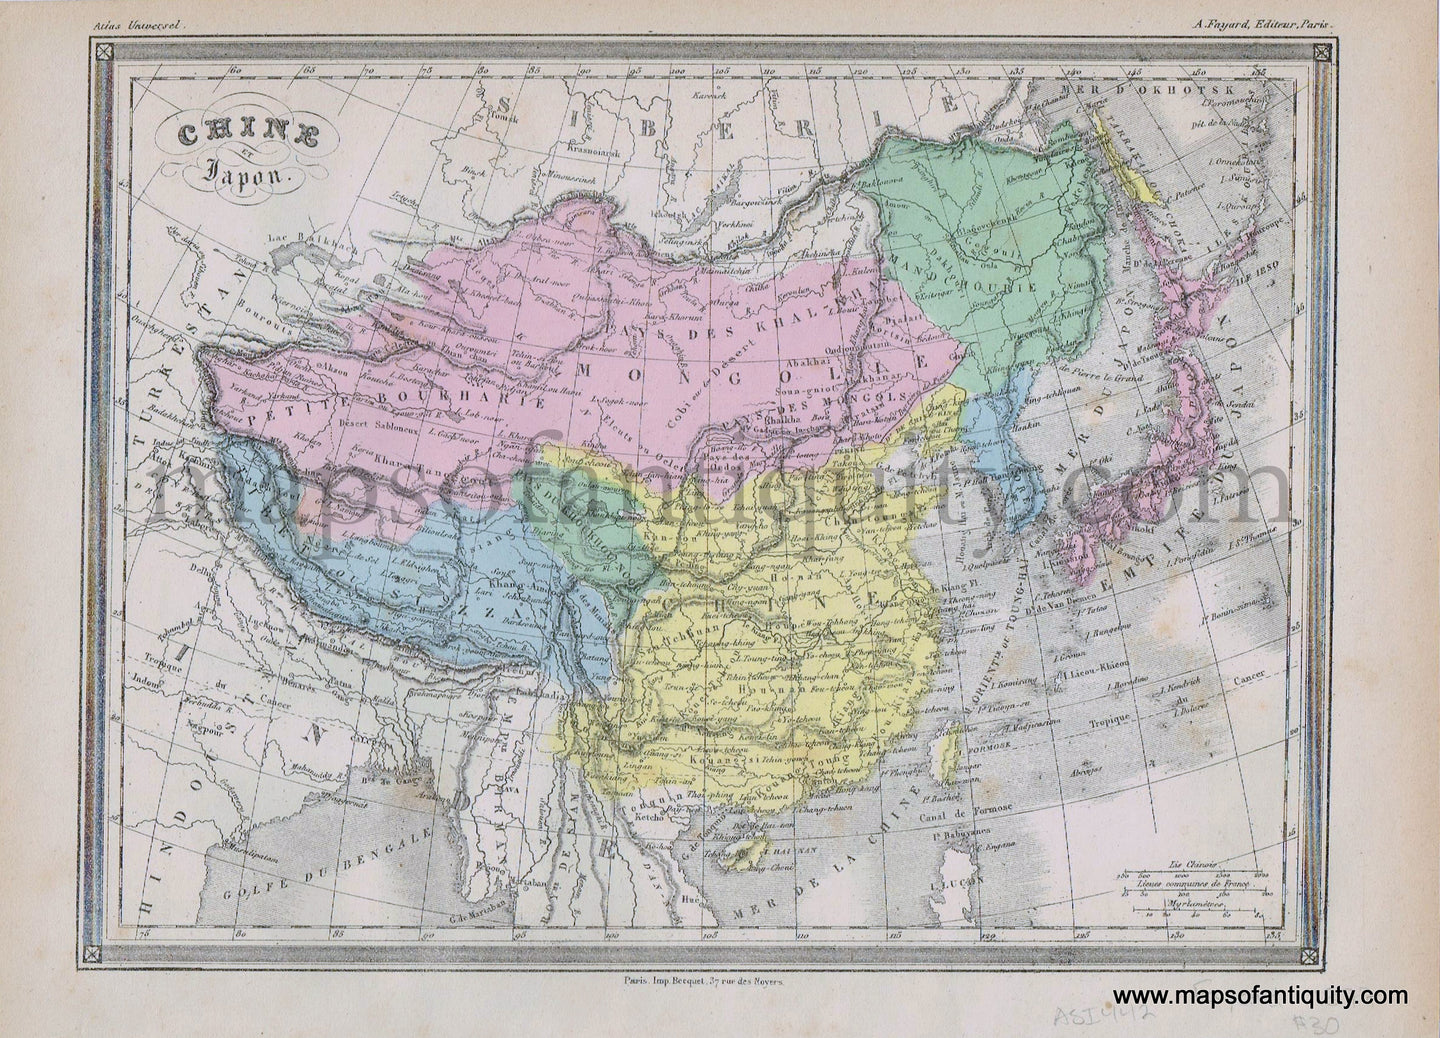 Antique-Printed-Color-Map-Asia-Chine-et-Japon---China-and-Japan-1877-Fayard-China-1800s-19th-century-Maps-of-Antiquity